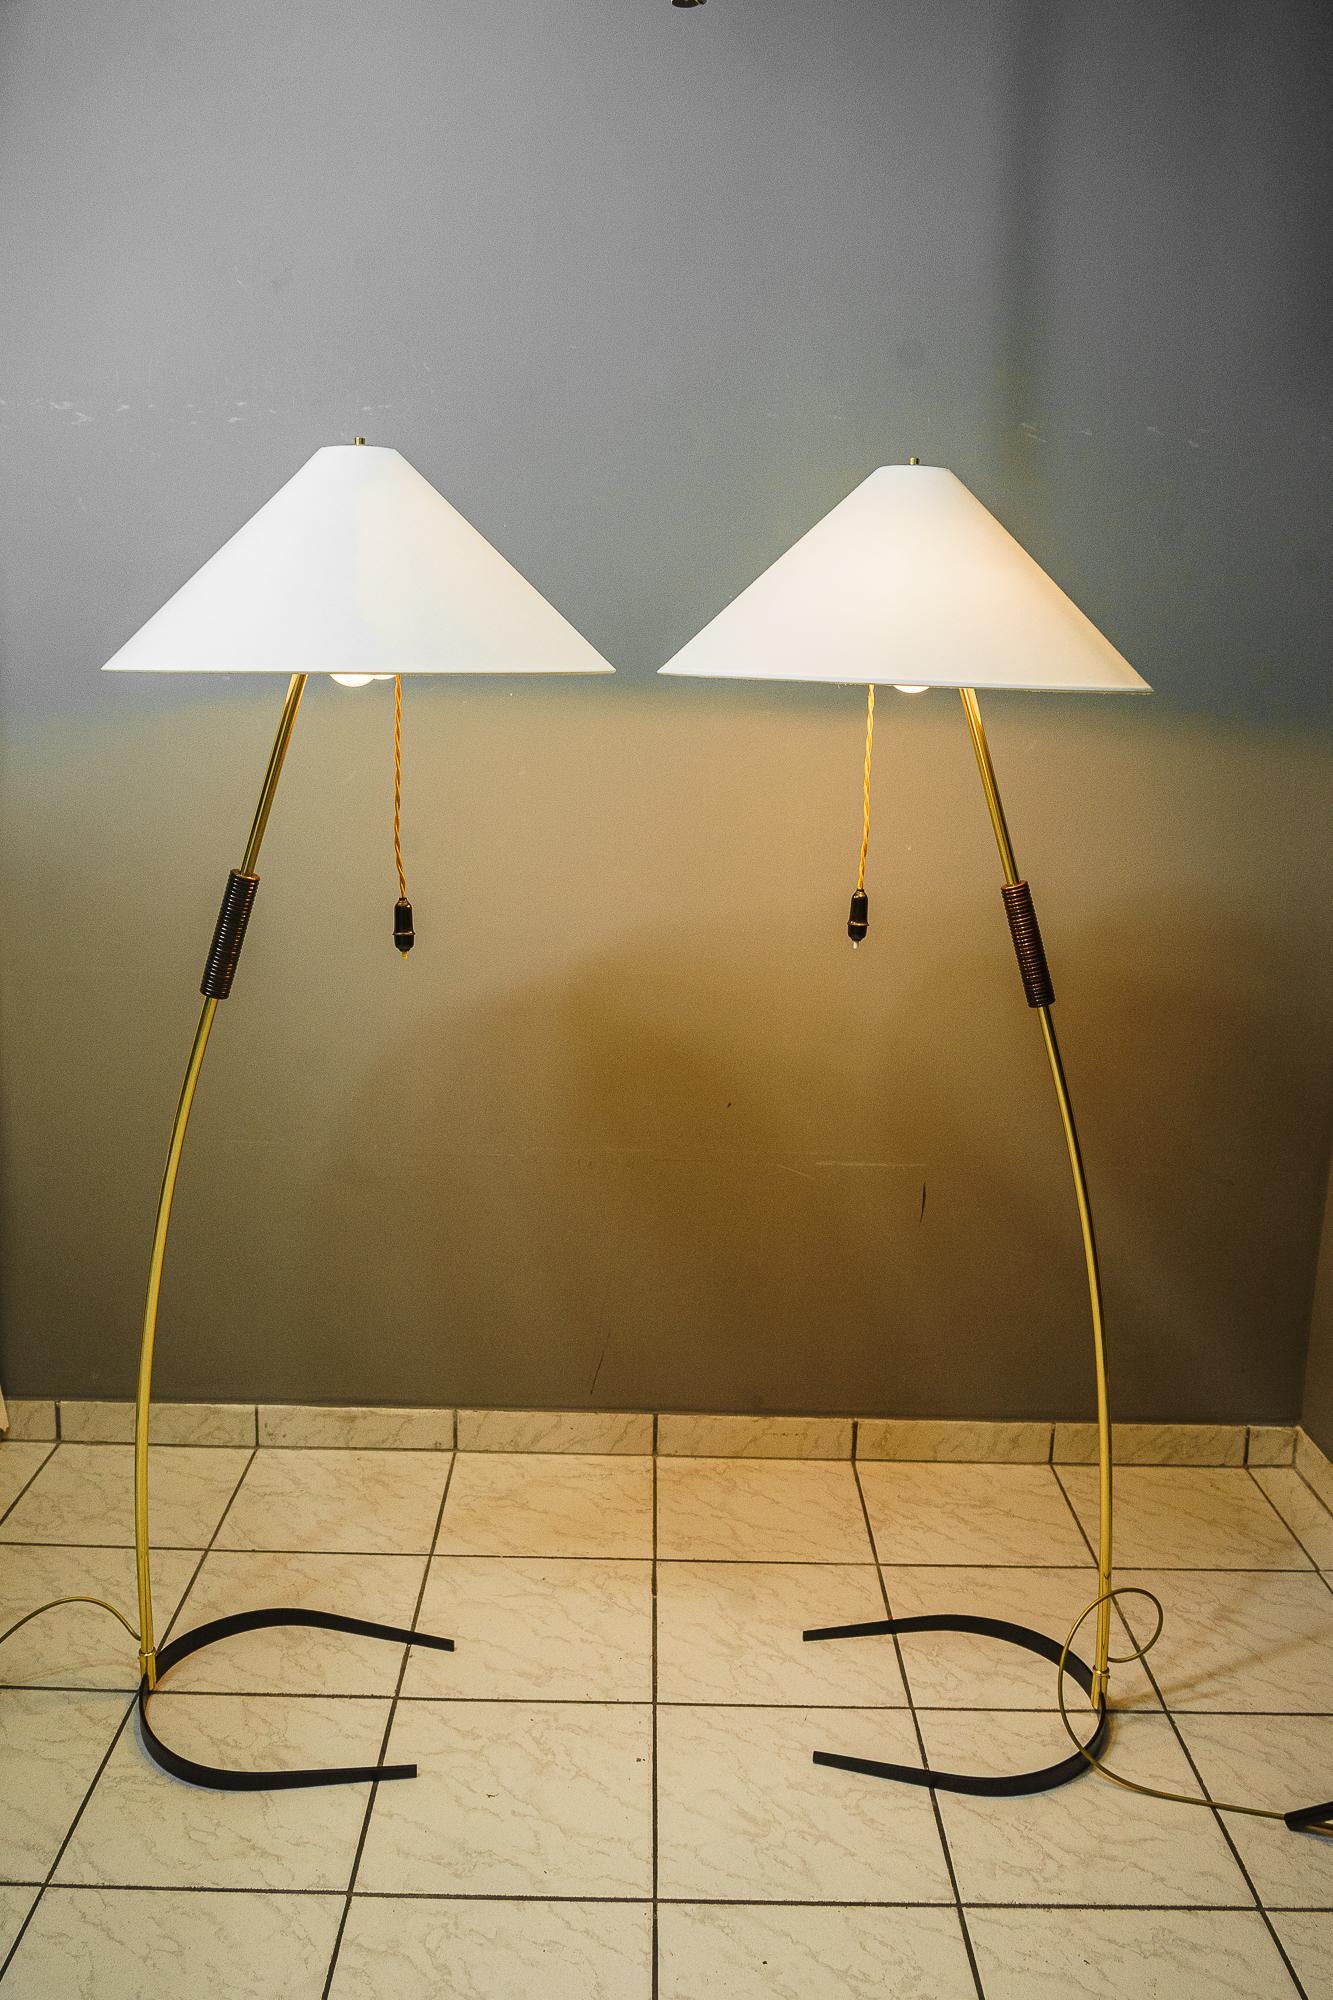 2x Rupert Nikoll Floor Lamps with Wood Handle, circa 1950s For Sale 5